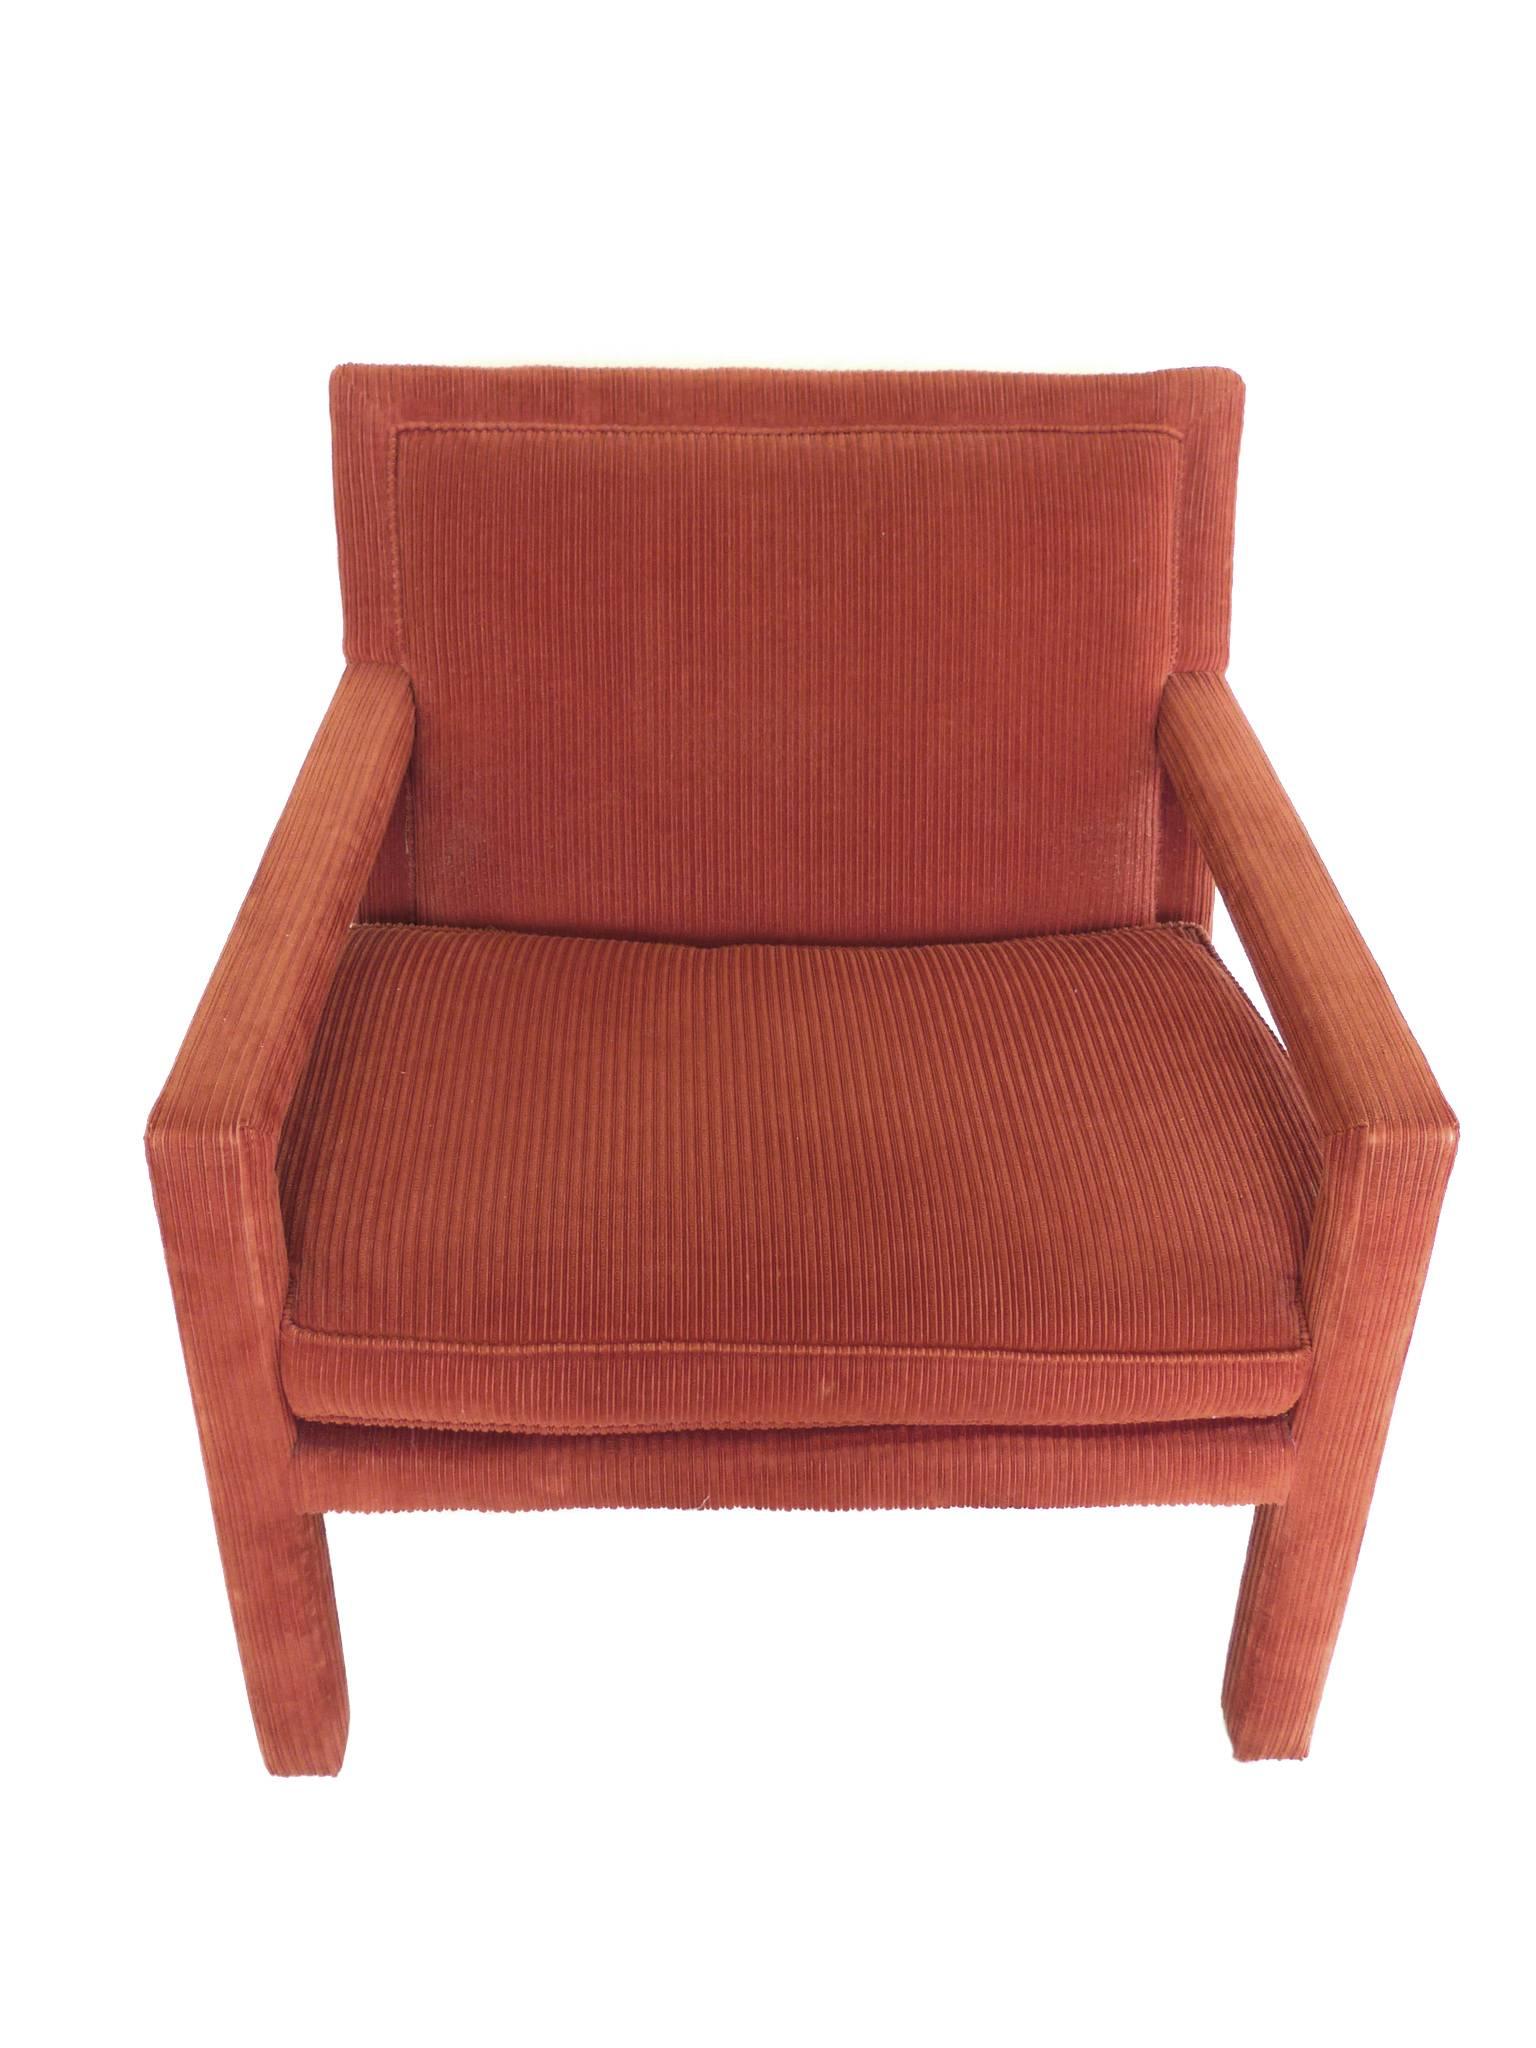 This outstanding pair of armchairs is rich in color and texture. They are completely covered in a carmine-orange corduroy upholstery. Crafted in the manner of Milo Baughman, the chairs are wide with simple, flat planes accentuated by the rich